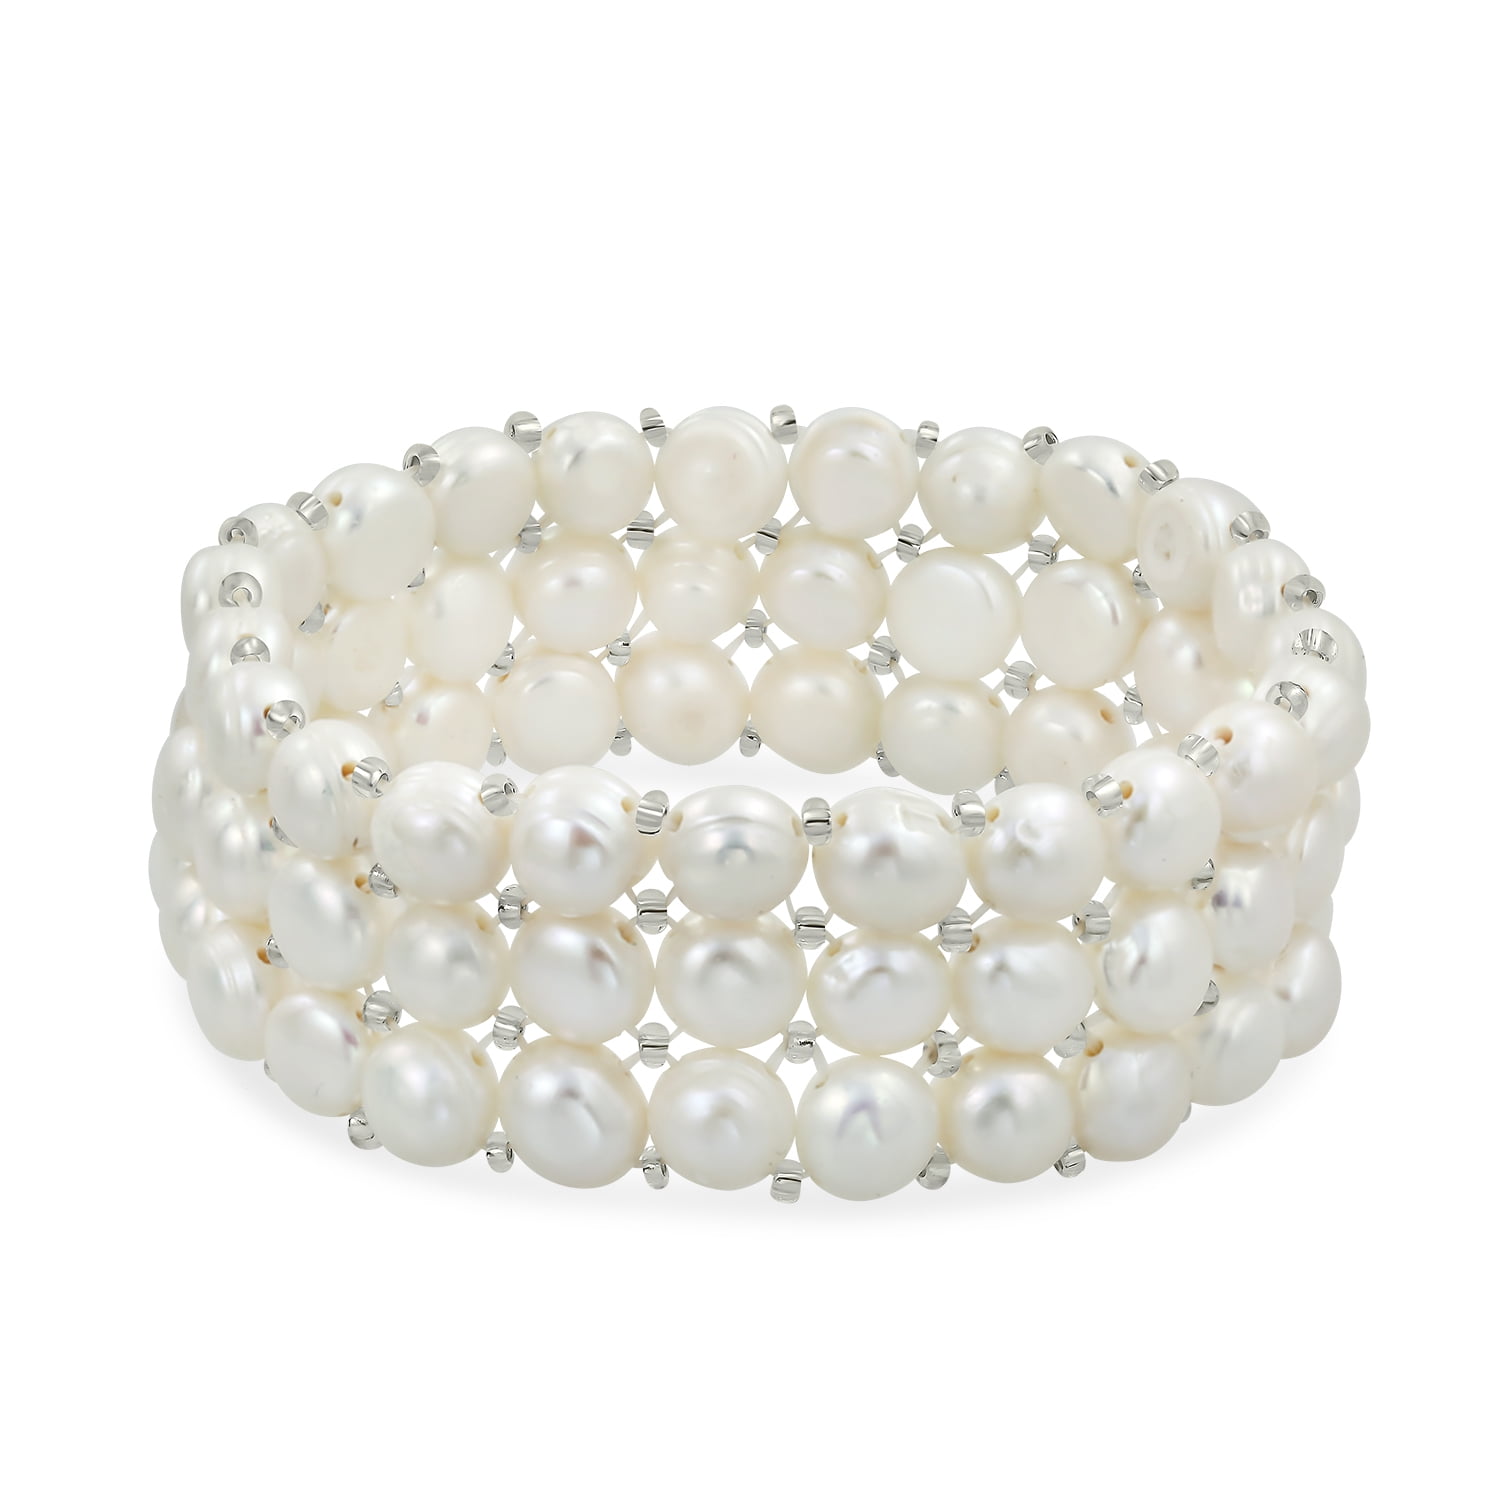 Fits any Wrist White Faux Pearl & Clear Crystal Alternating Stone Bracelet